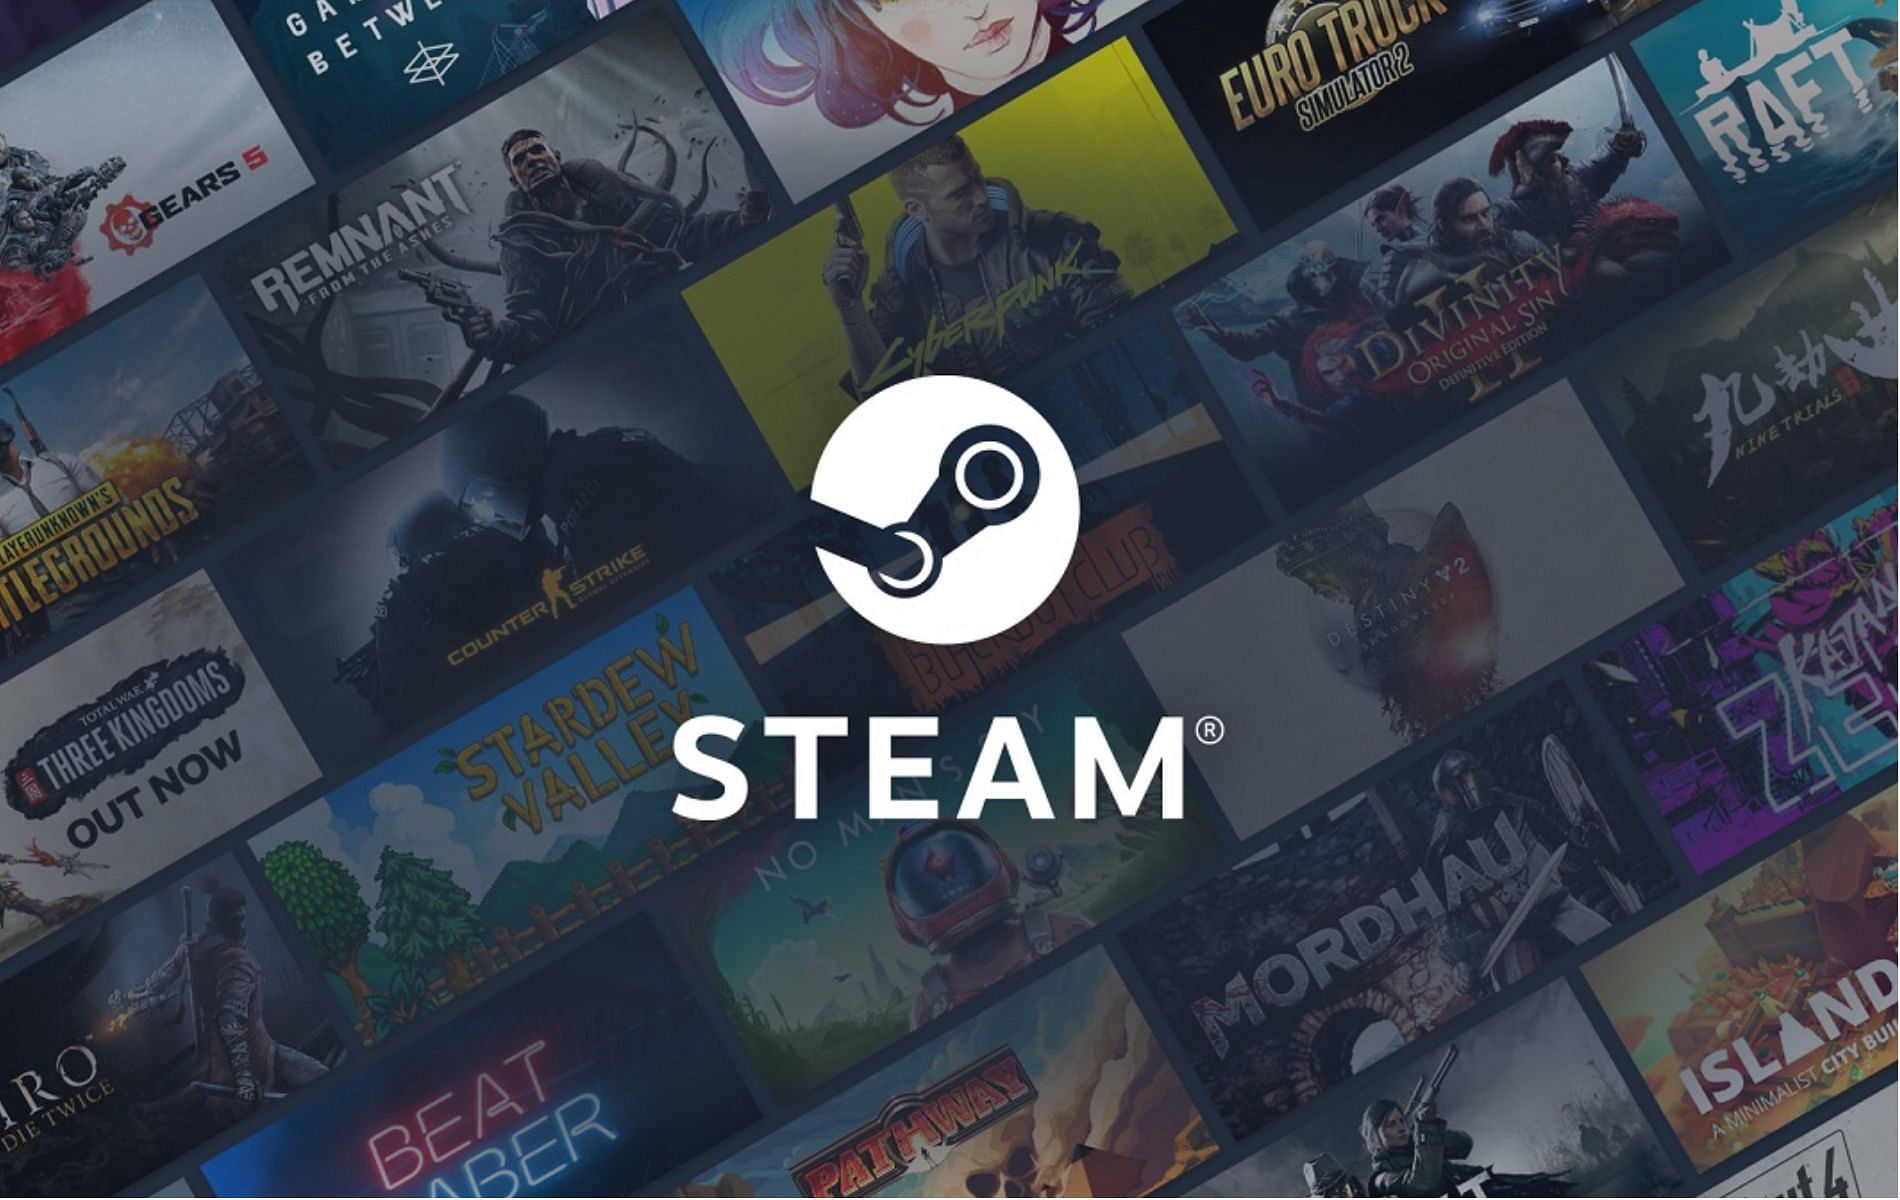 Steam Sale, June 2022: Start date, expected game discounts, and more